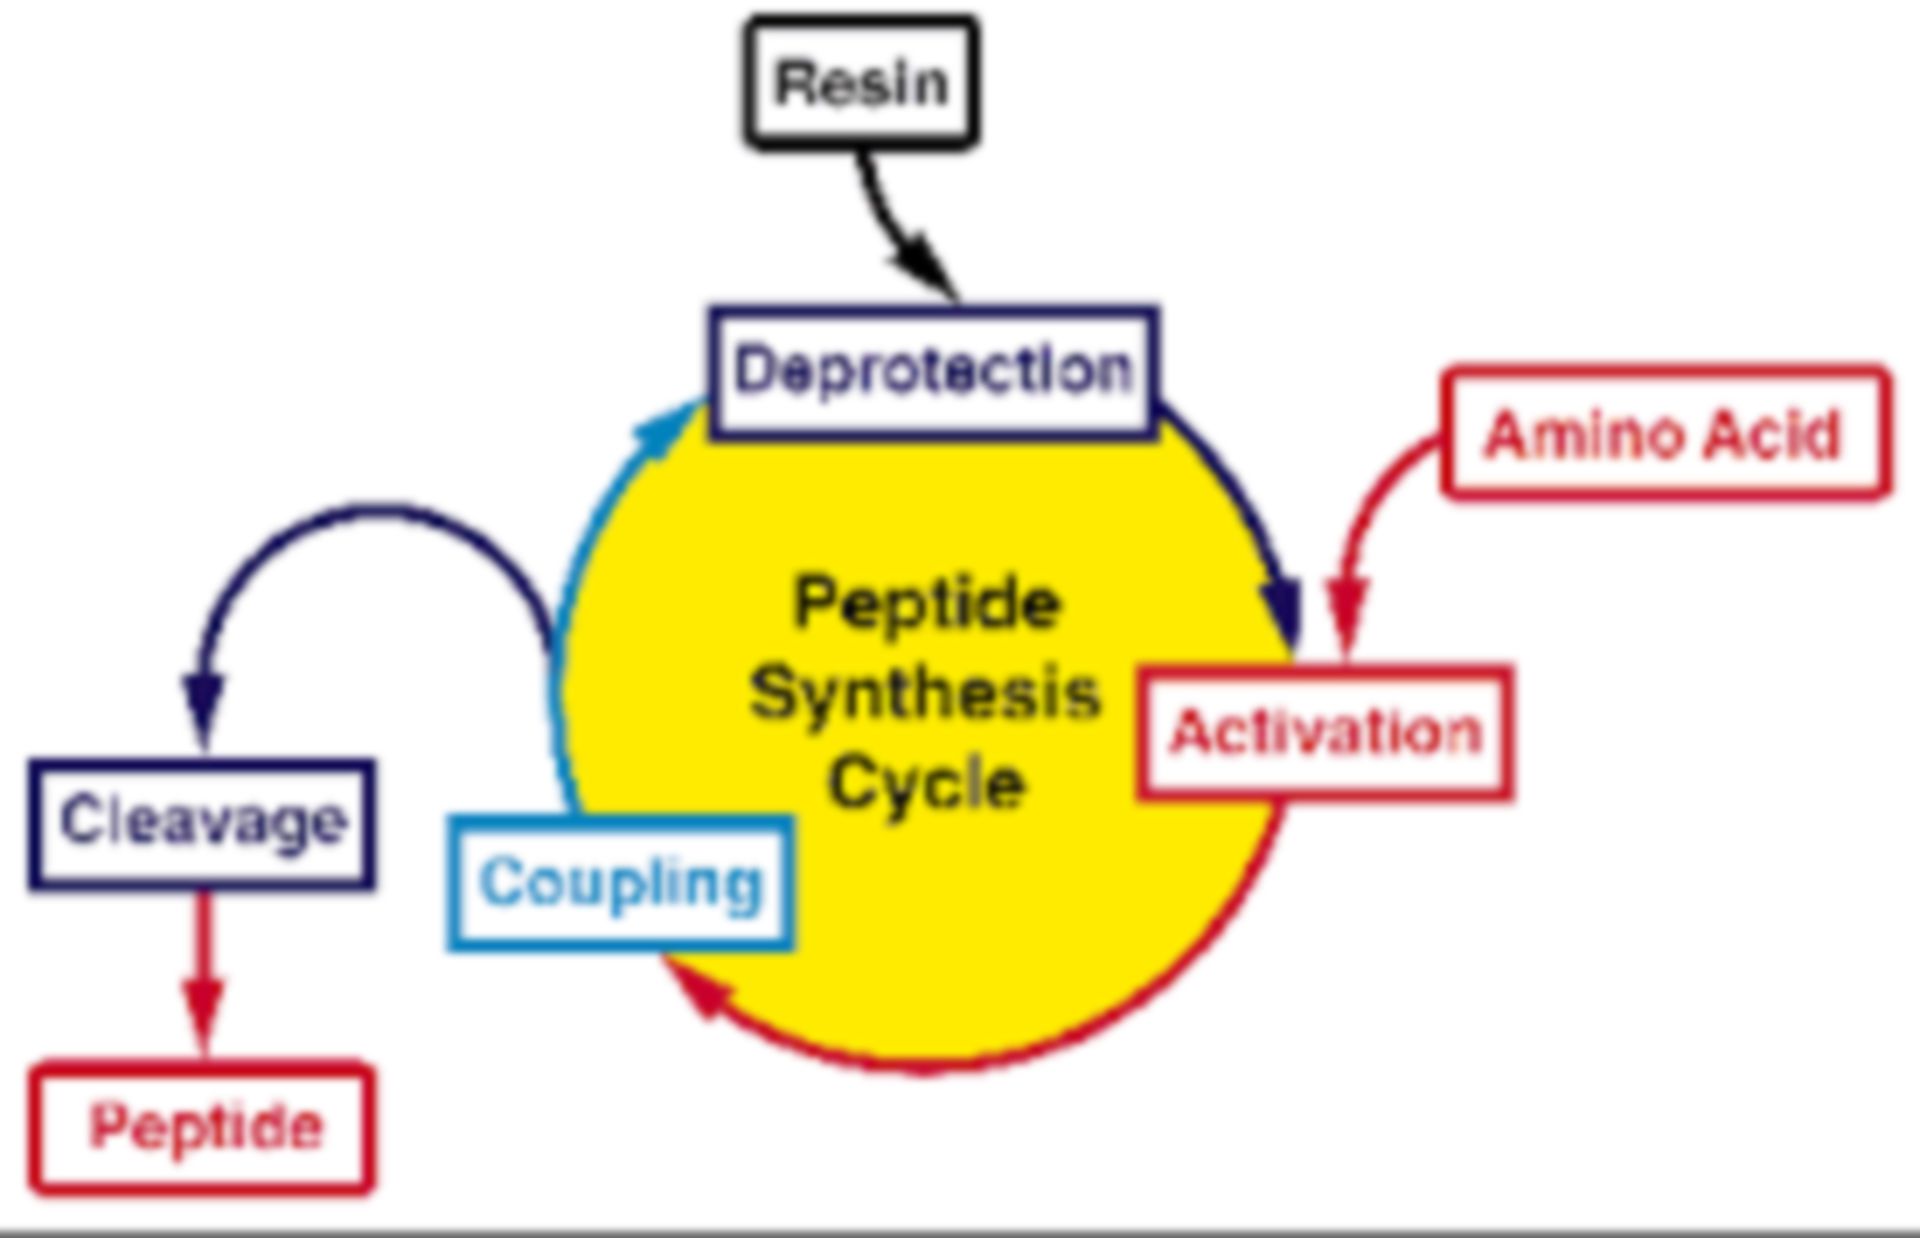 Solid phase peptide synthesis